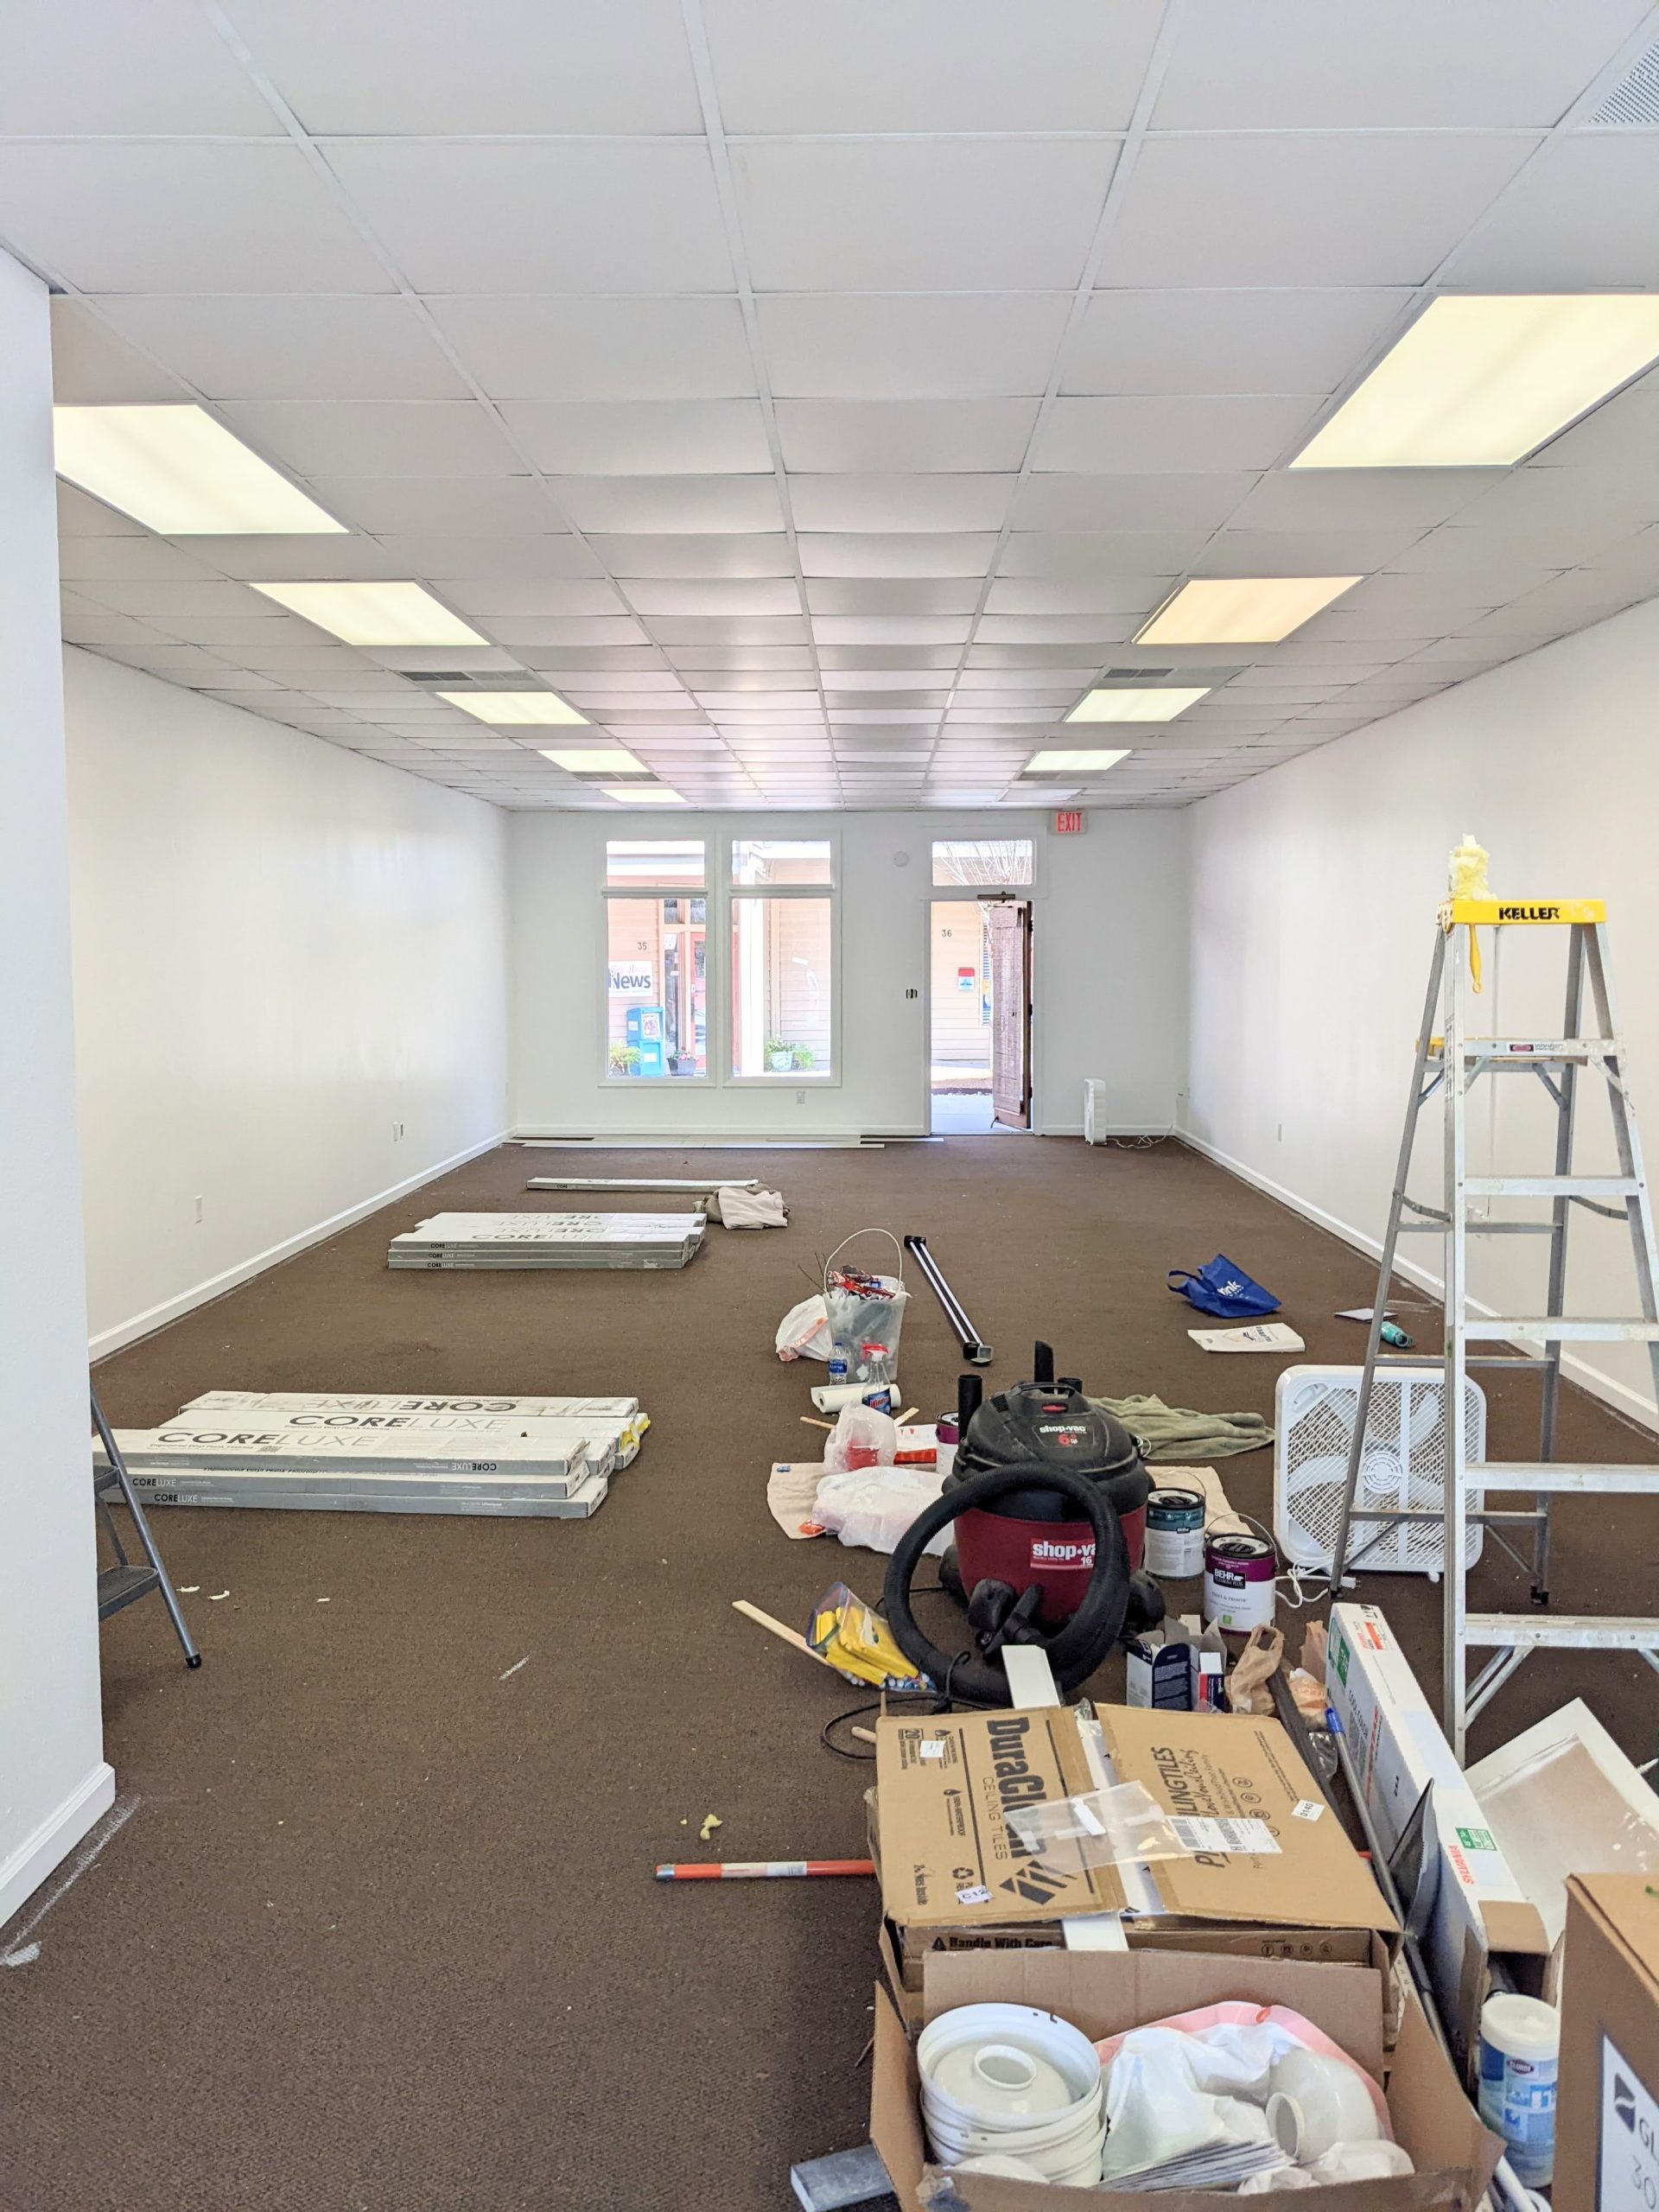 Inside of photography studio showing freshly painted white walls